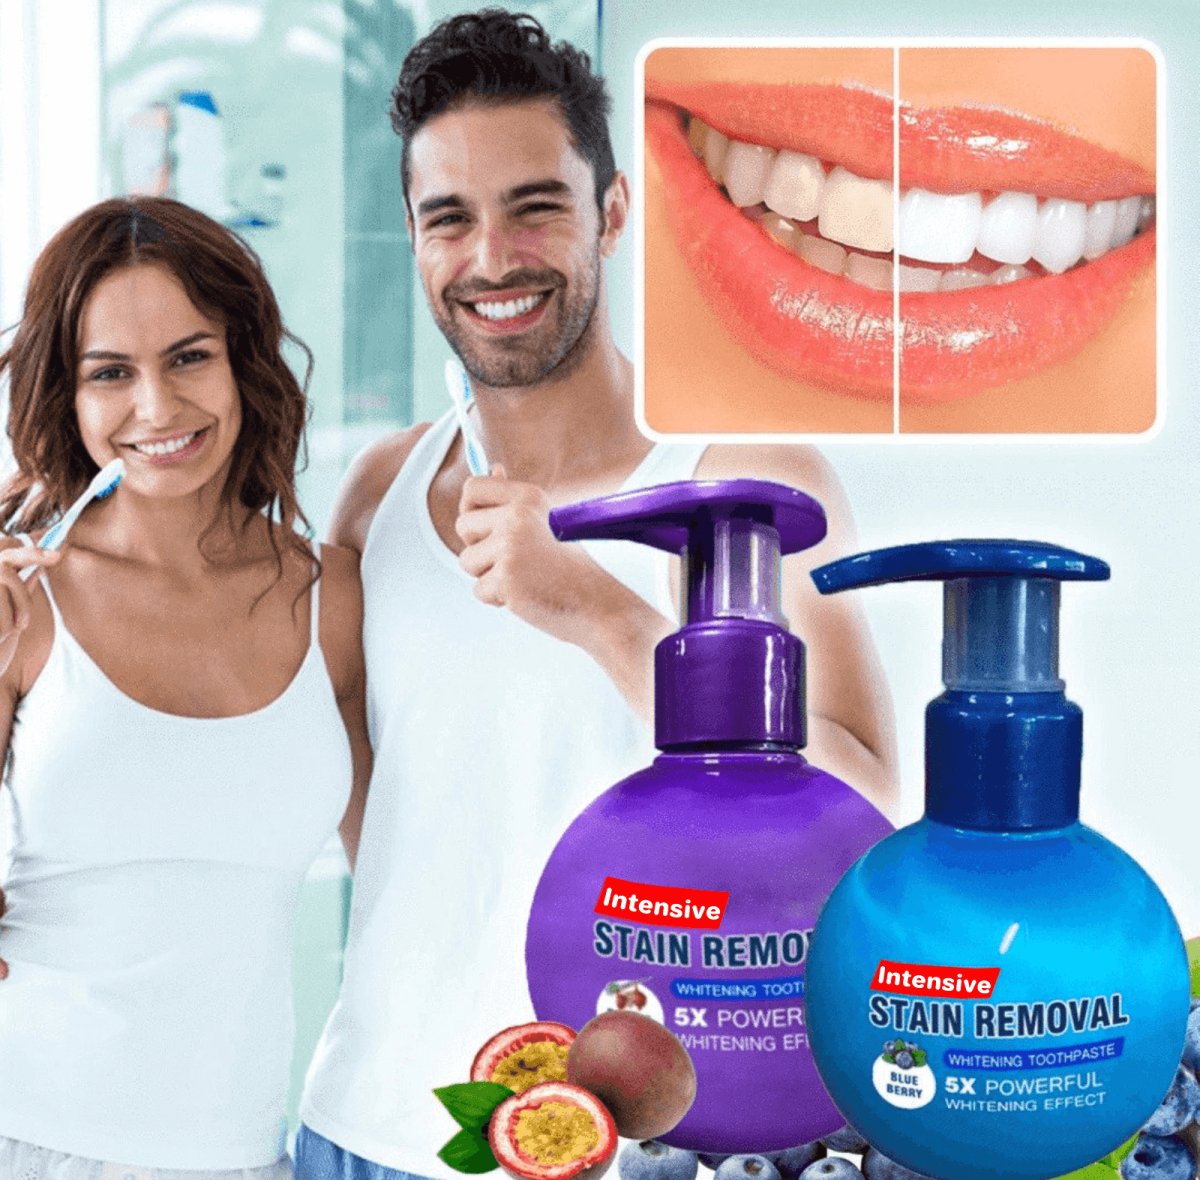 Intensive Stain Removal Whitening Toothpaste - PlanetShopper